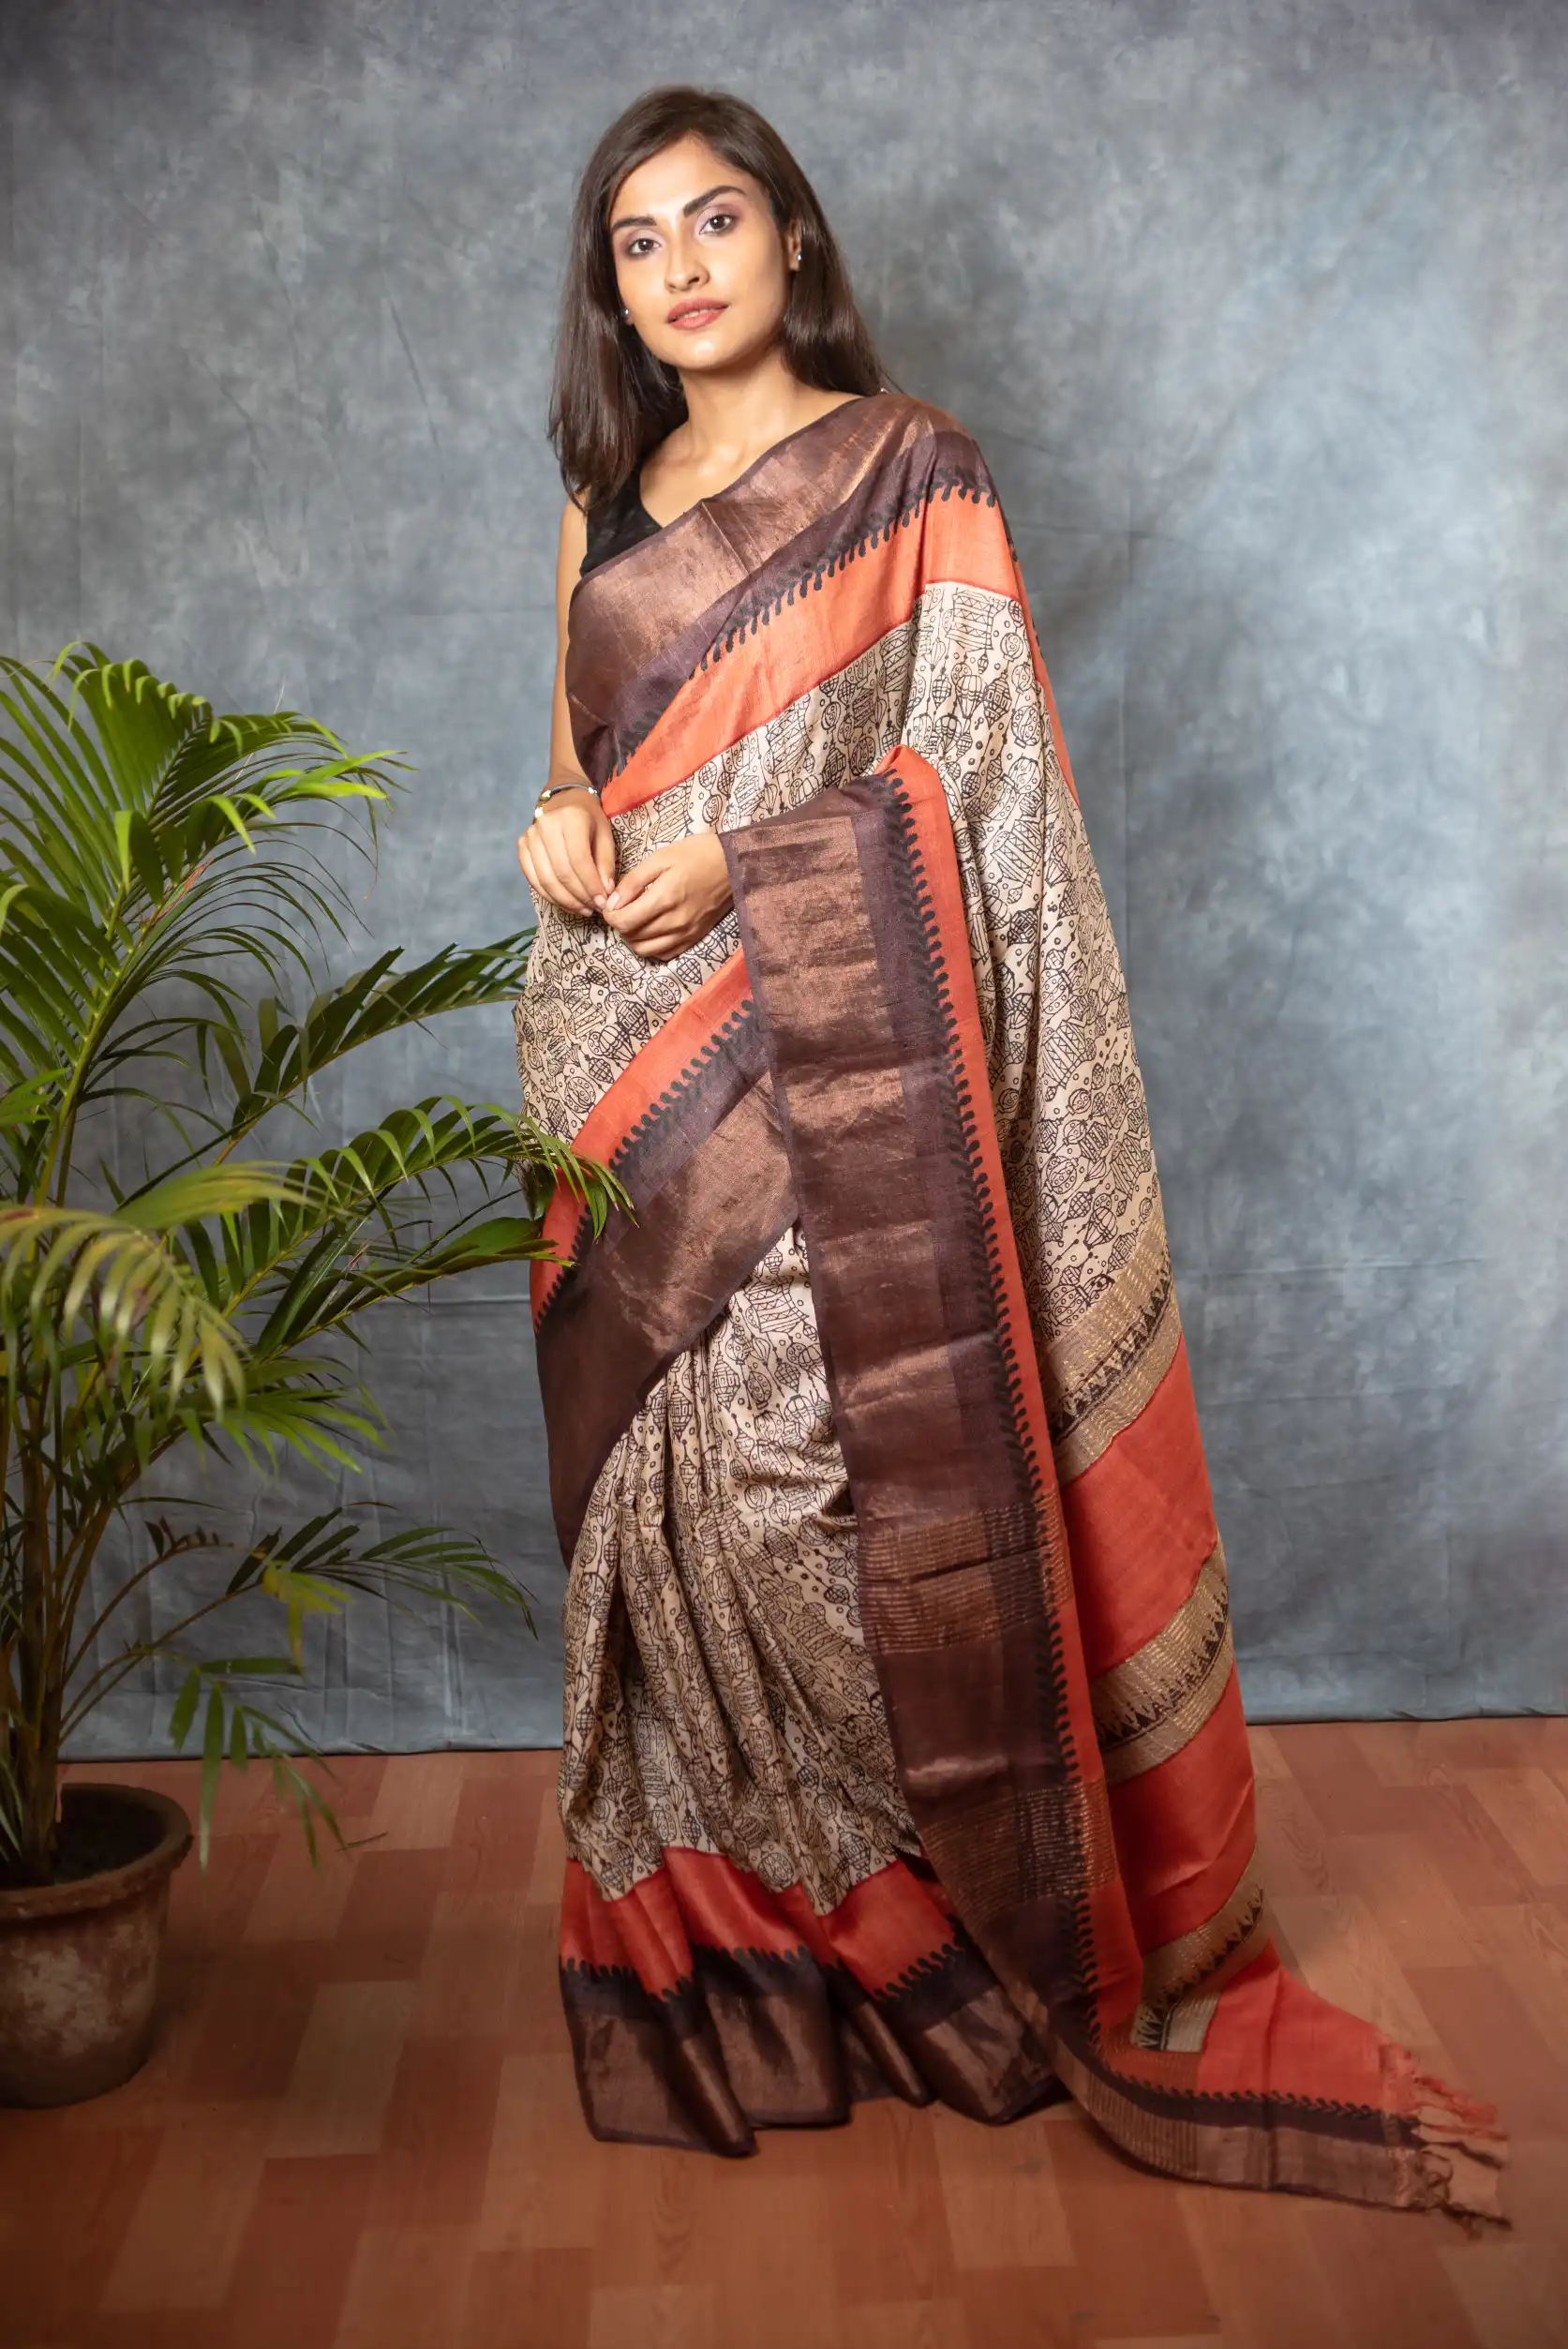 Latest collection of block print saree perfect for all occasions-2 -Ramdhanu Ethnic